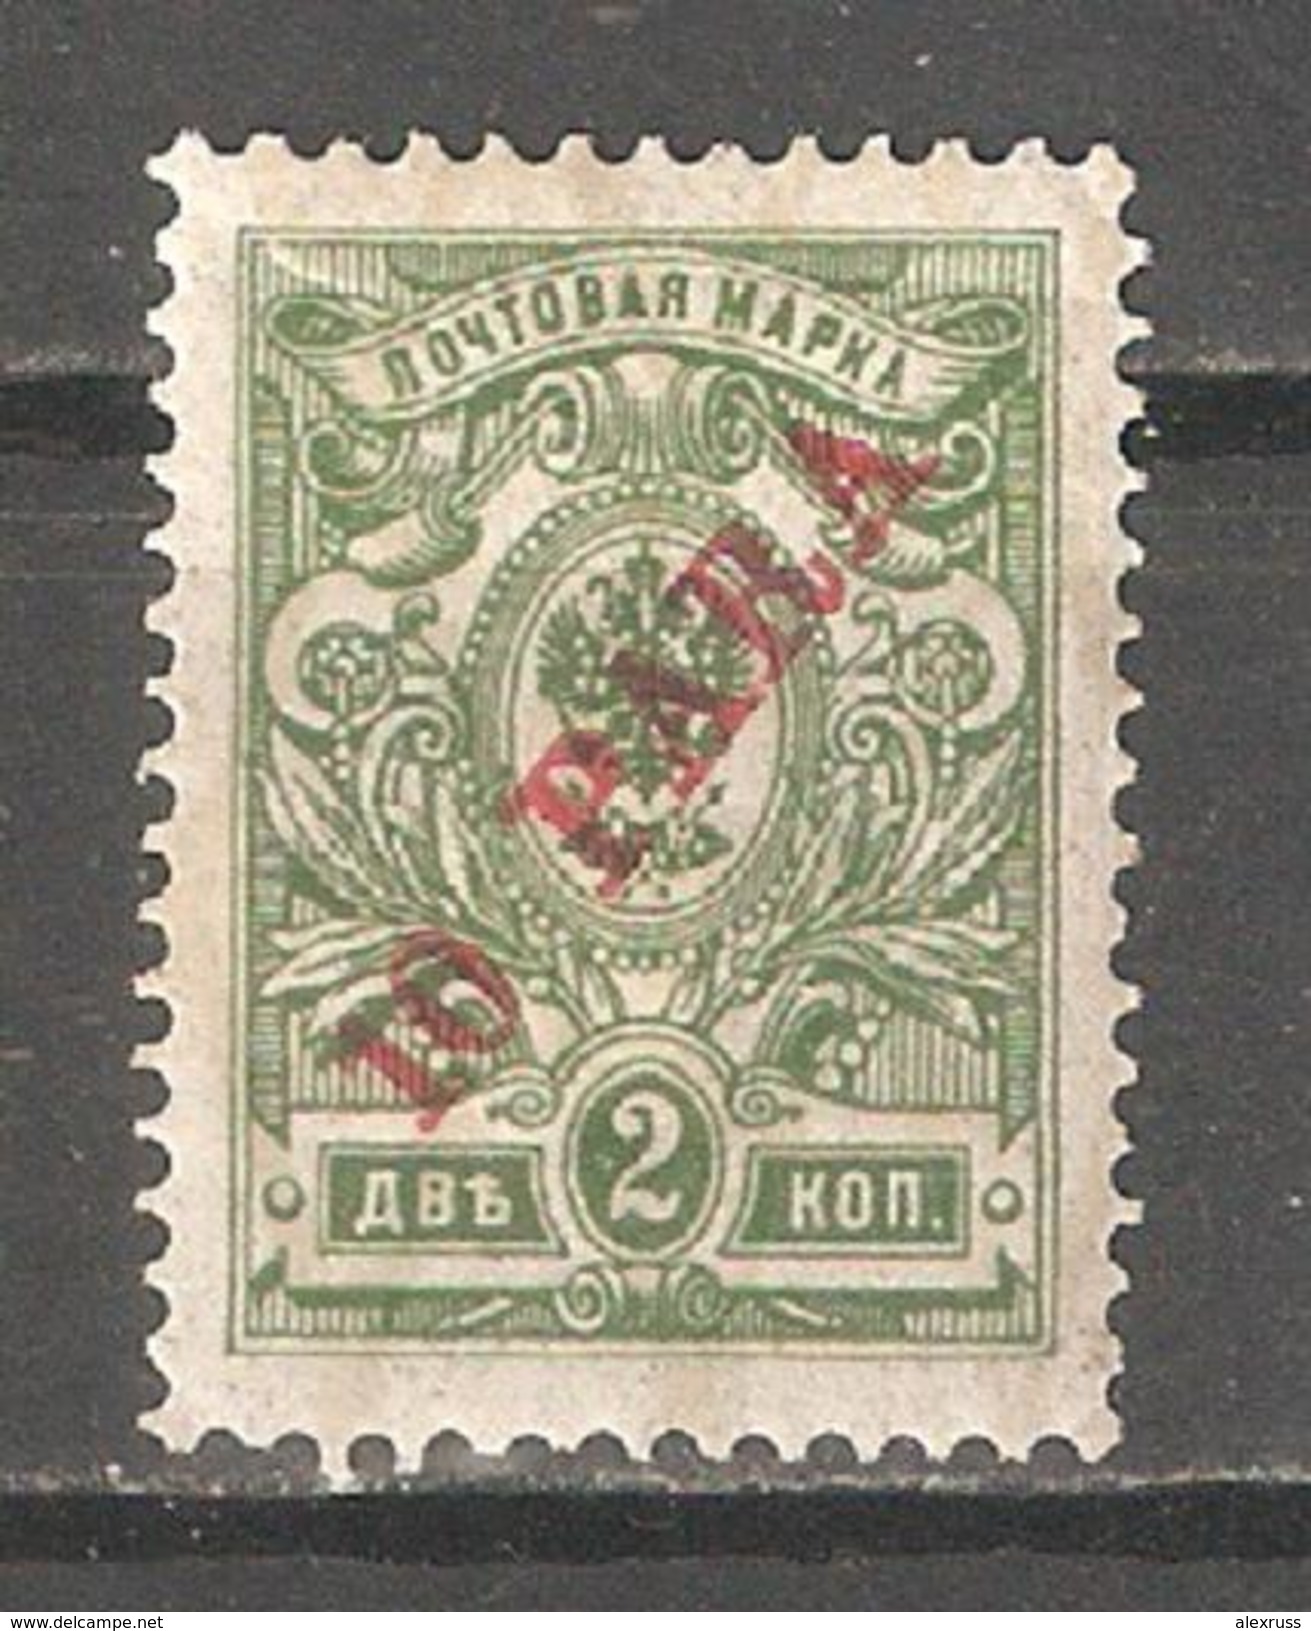 Russia 1910 Offices In Turkey,10pa On 2k,Sc 202,VF Mint Hinged* - Levant